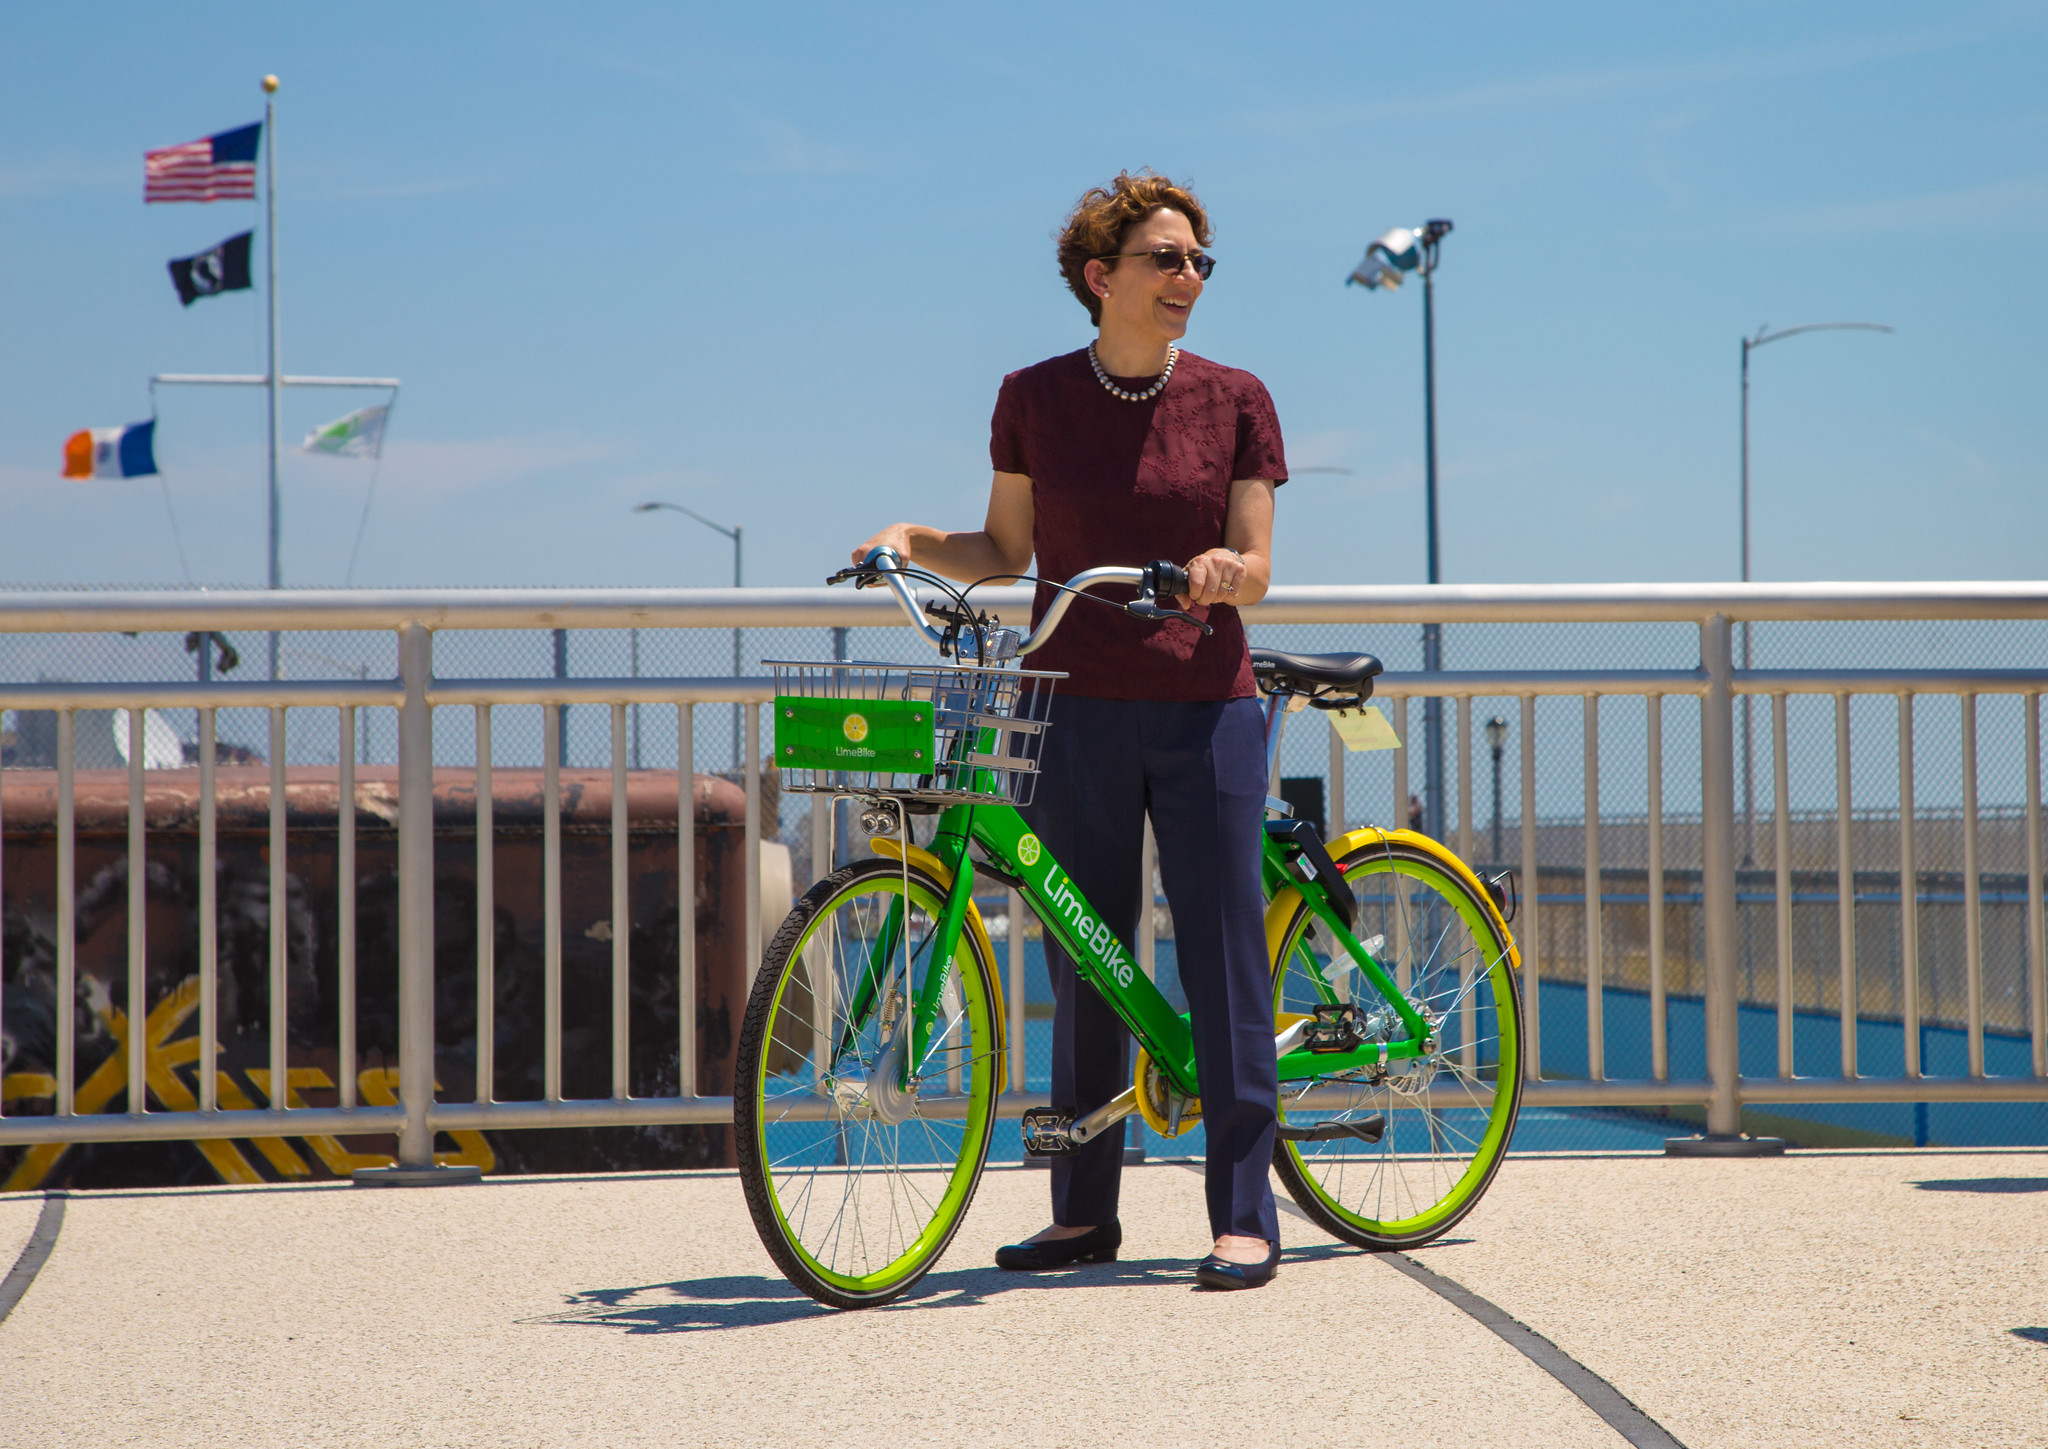 Polly Trottenberg stands over a green bikeshare bicycle on a pier in New York City